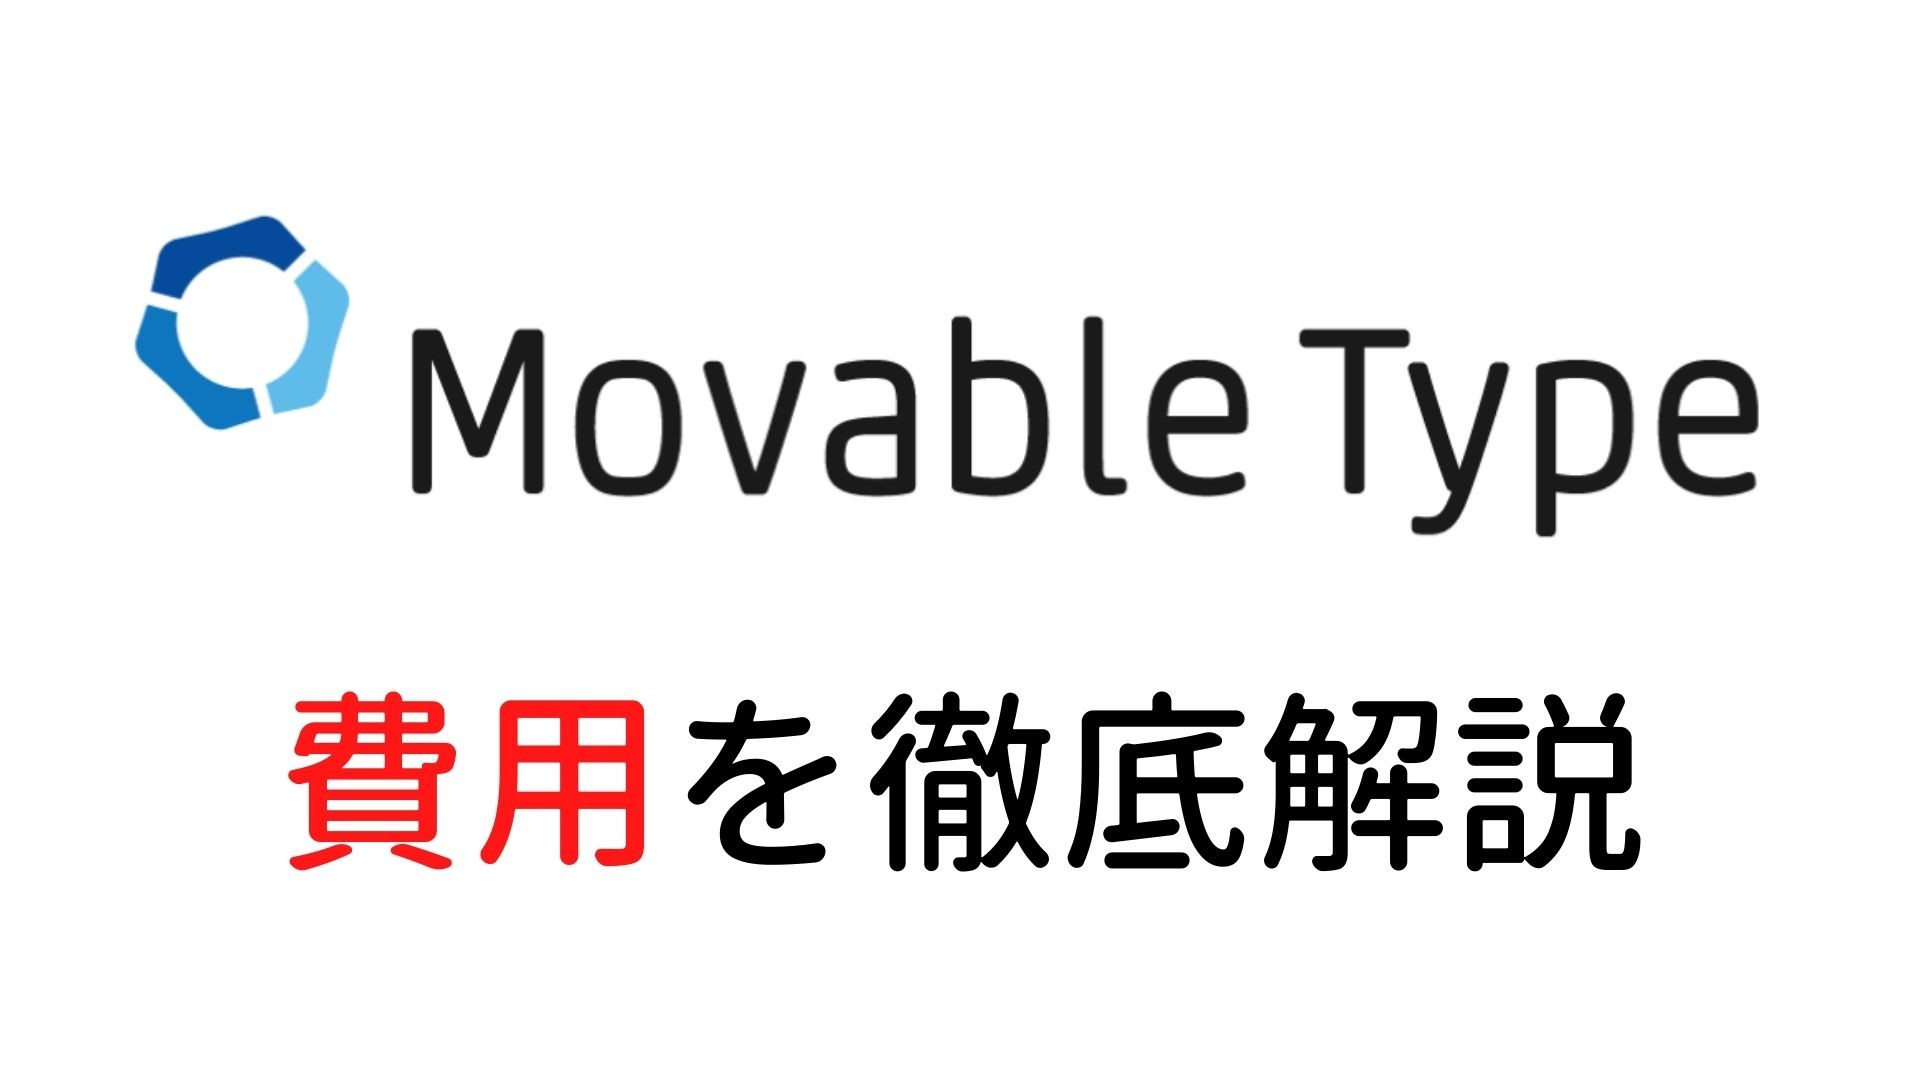 MovableTypeの費用を徹底解説！初期費用からメンテナンスまで全て説明します。